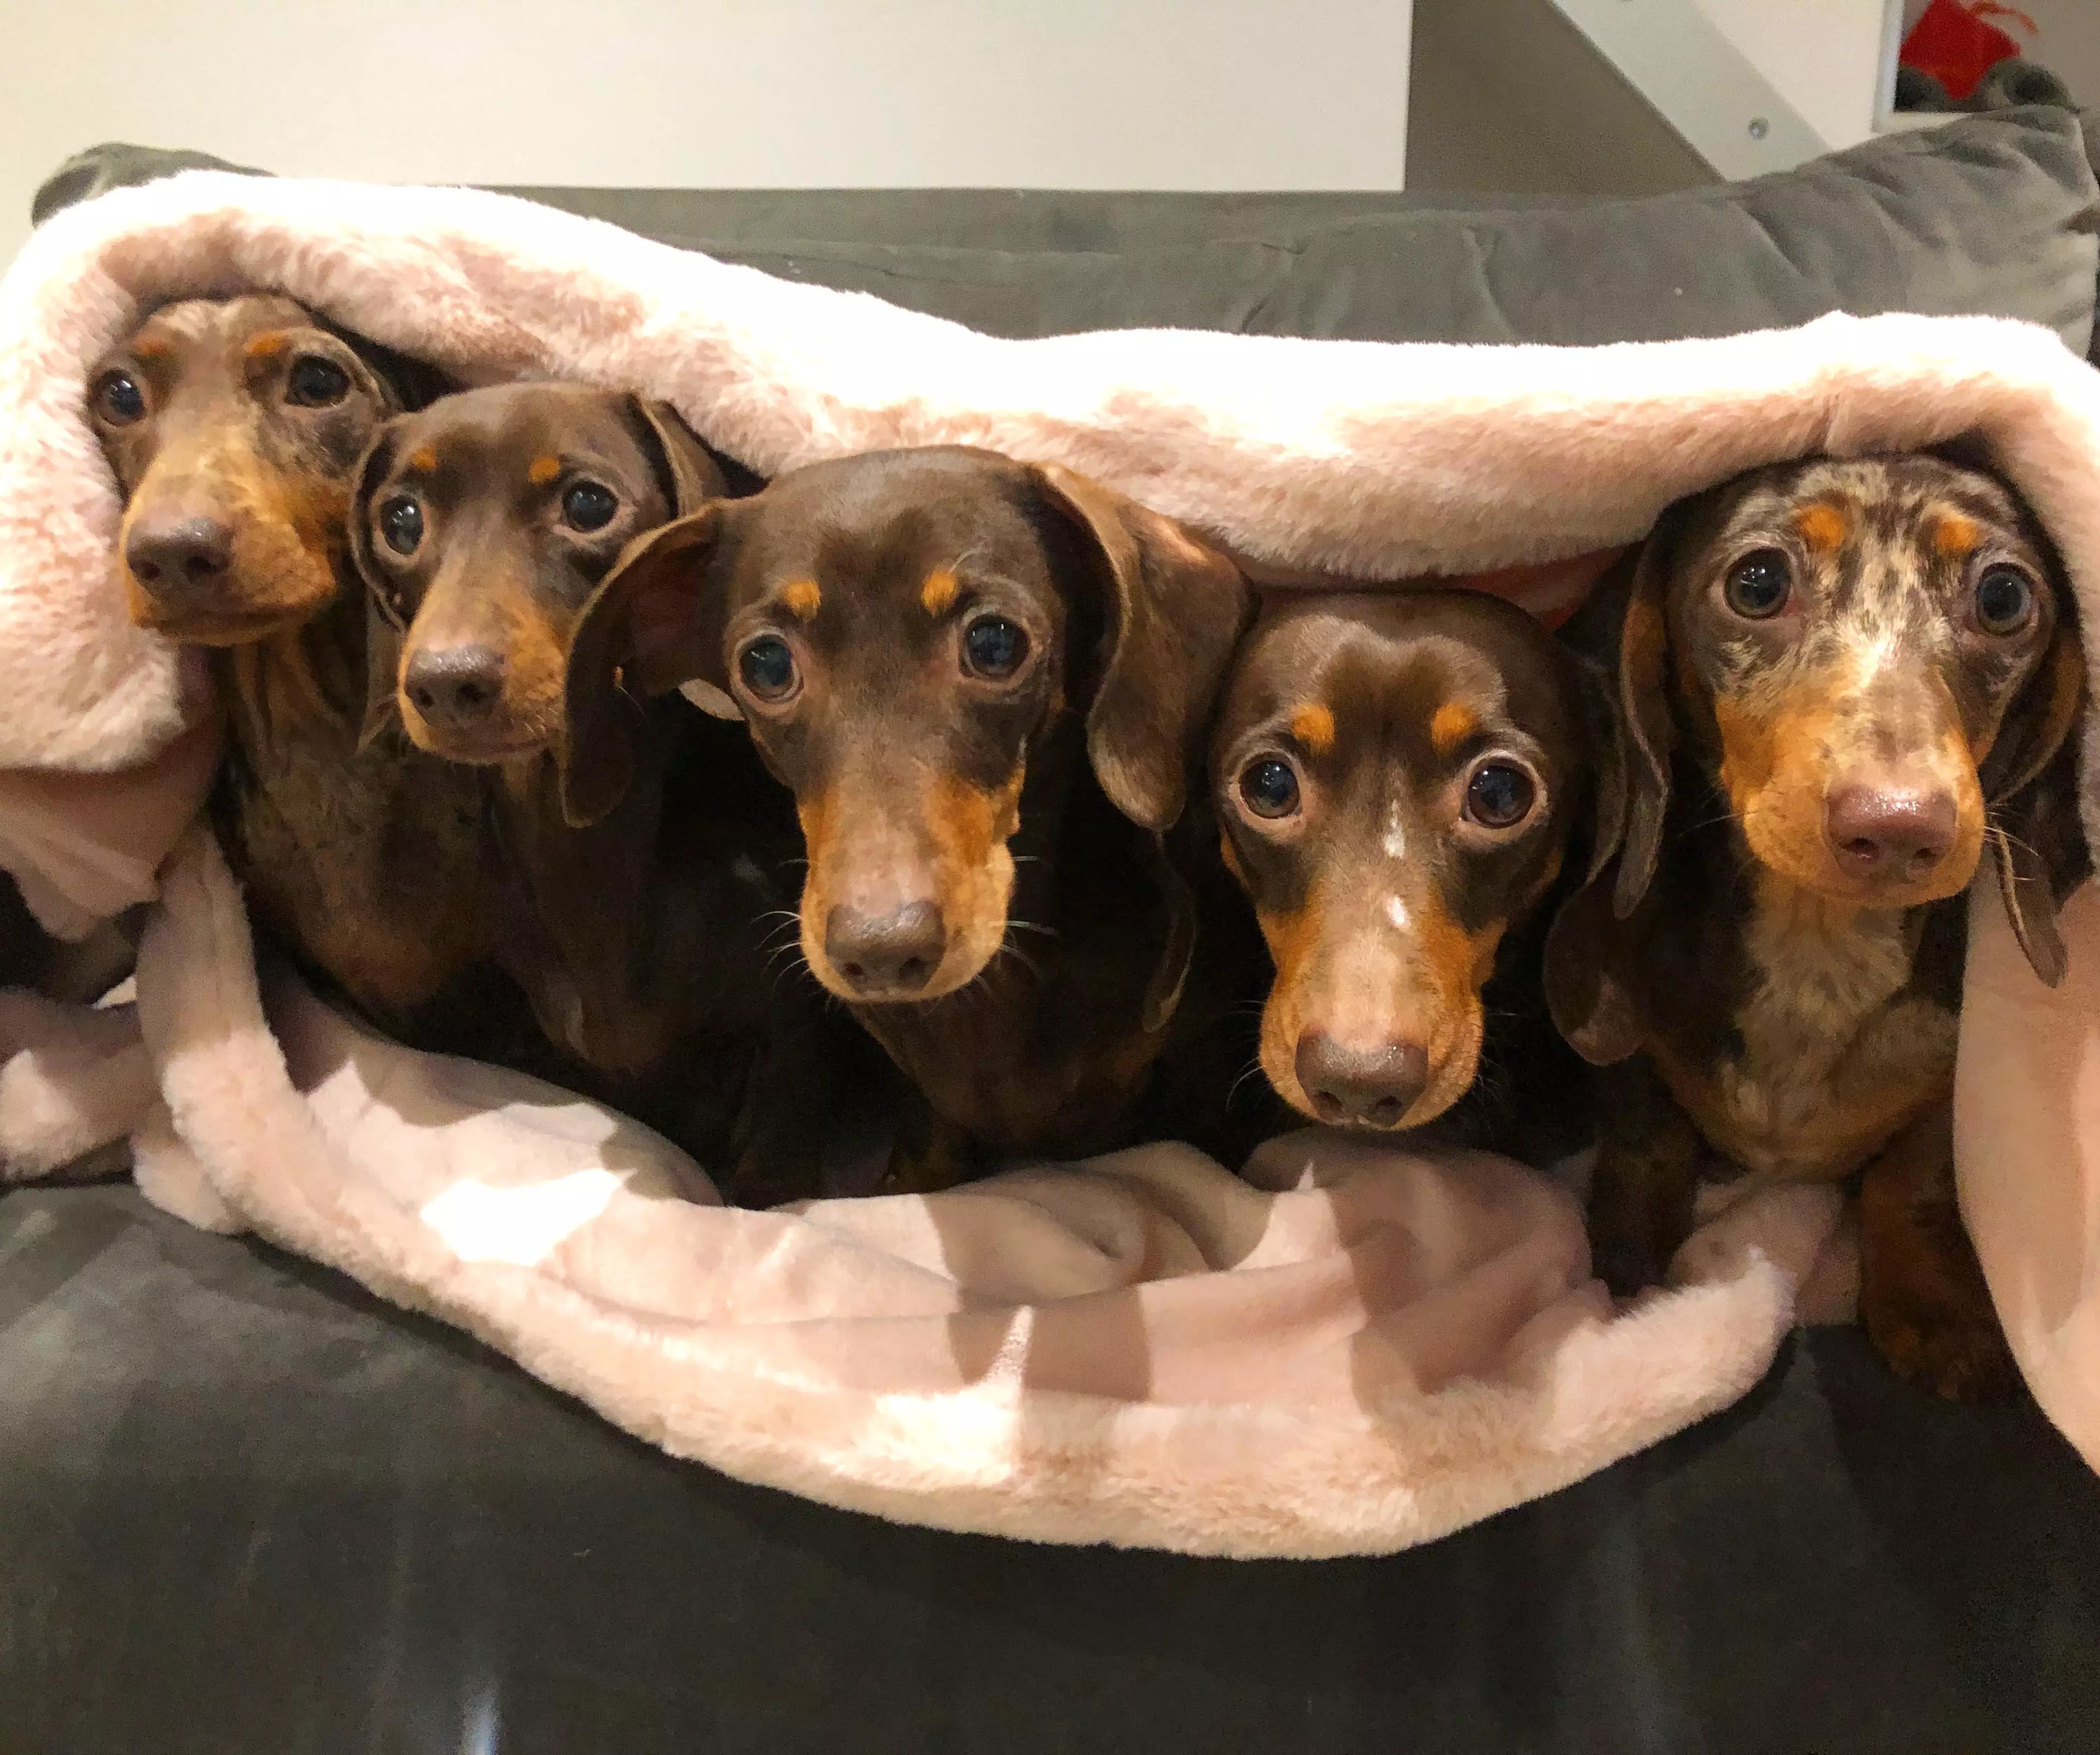 Harriet says she loves all five of her dogs equally (